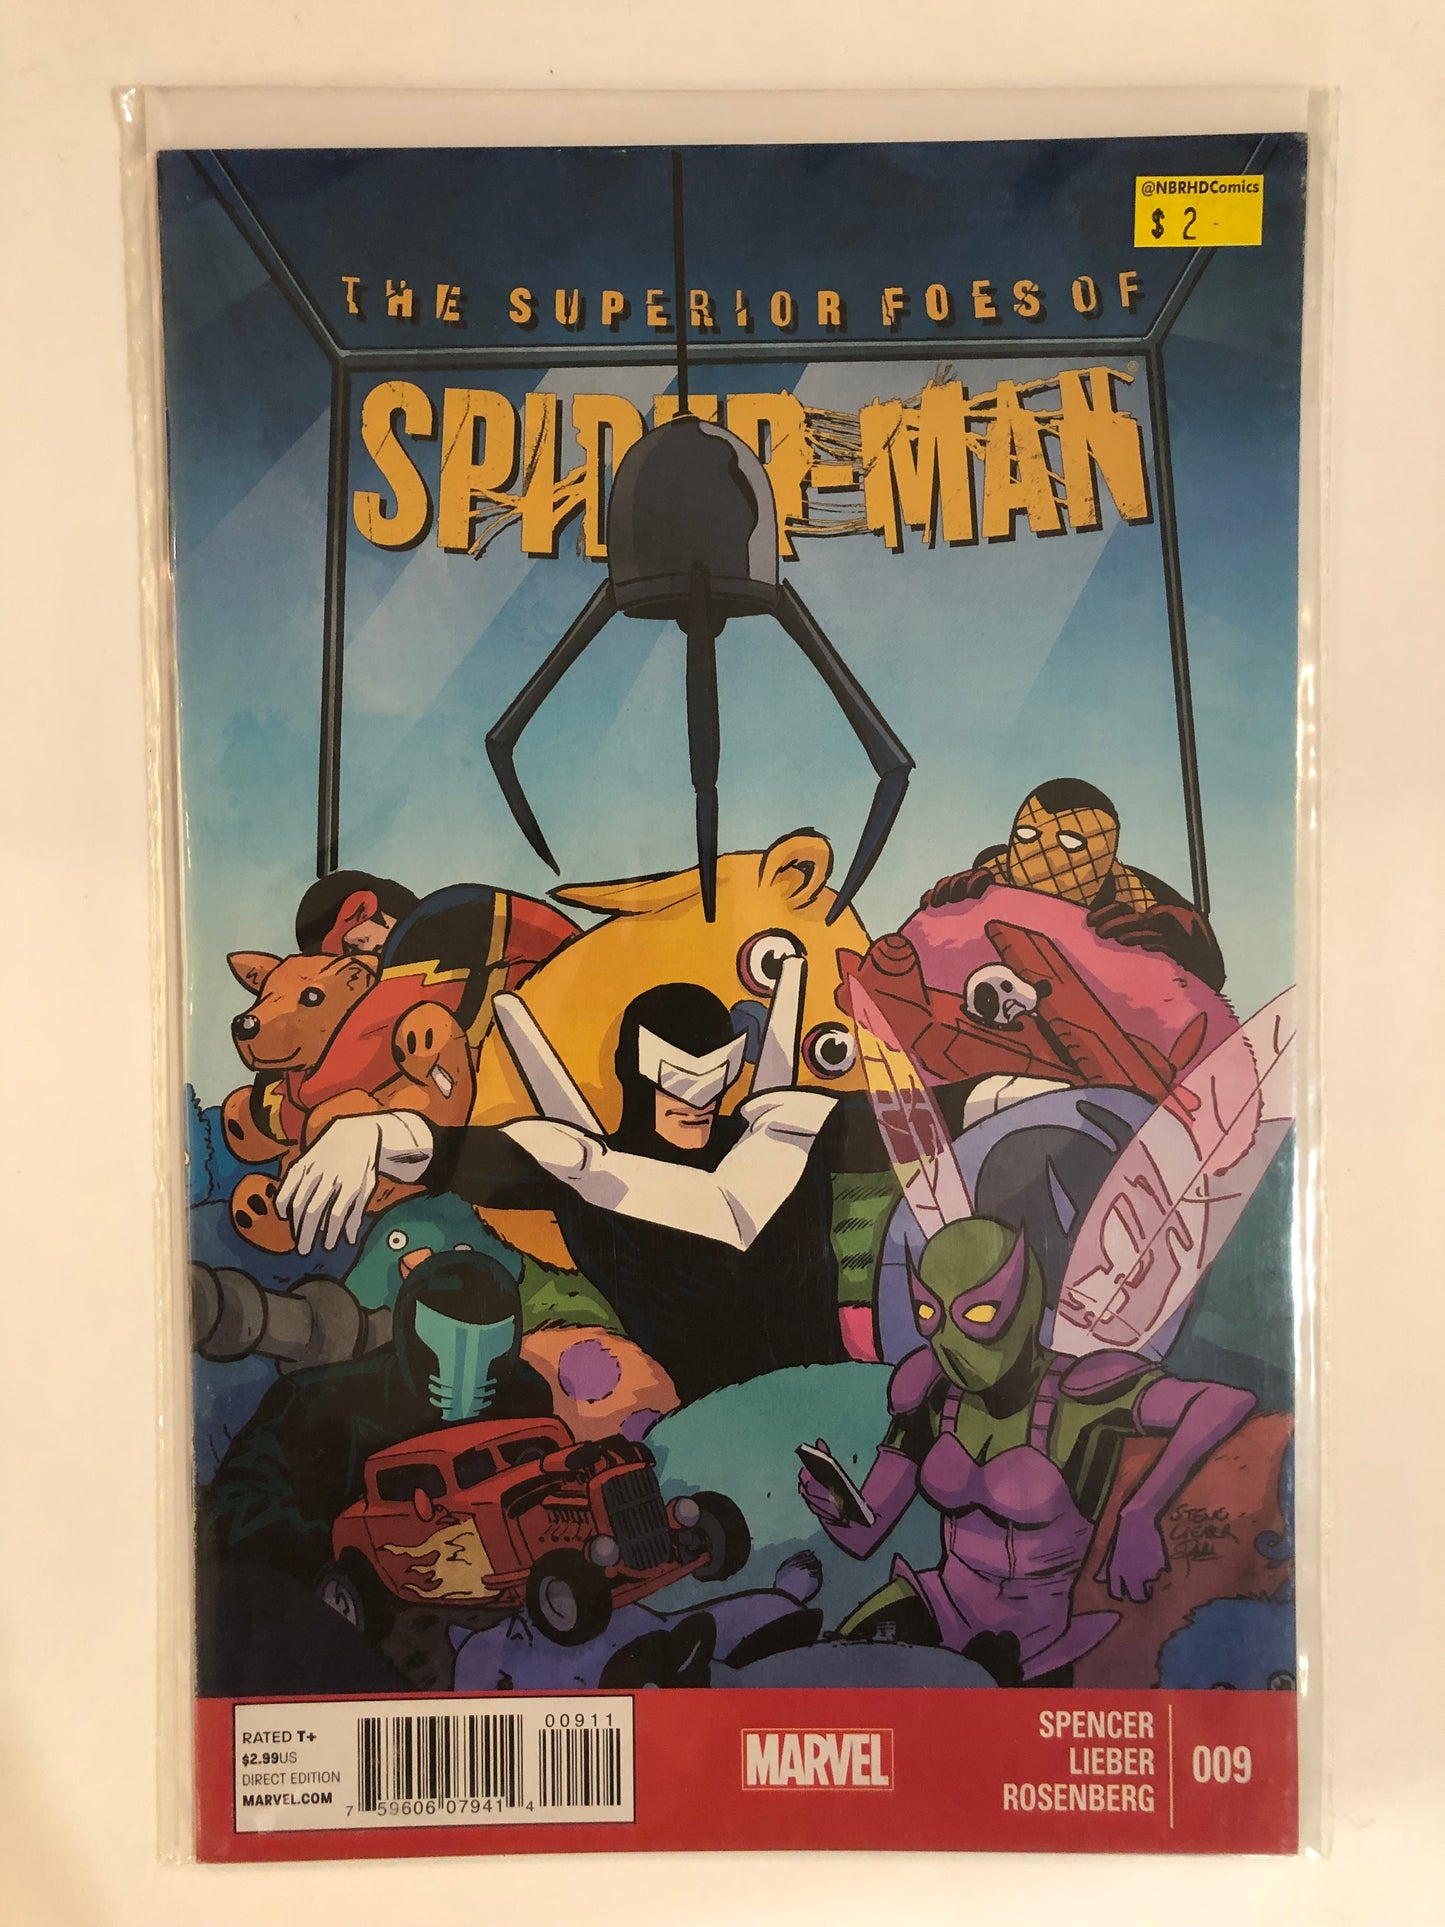 The Superior Foes of Spider-Man #9